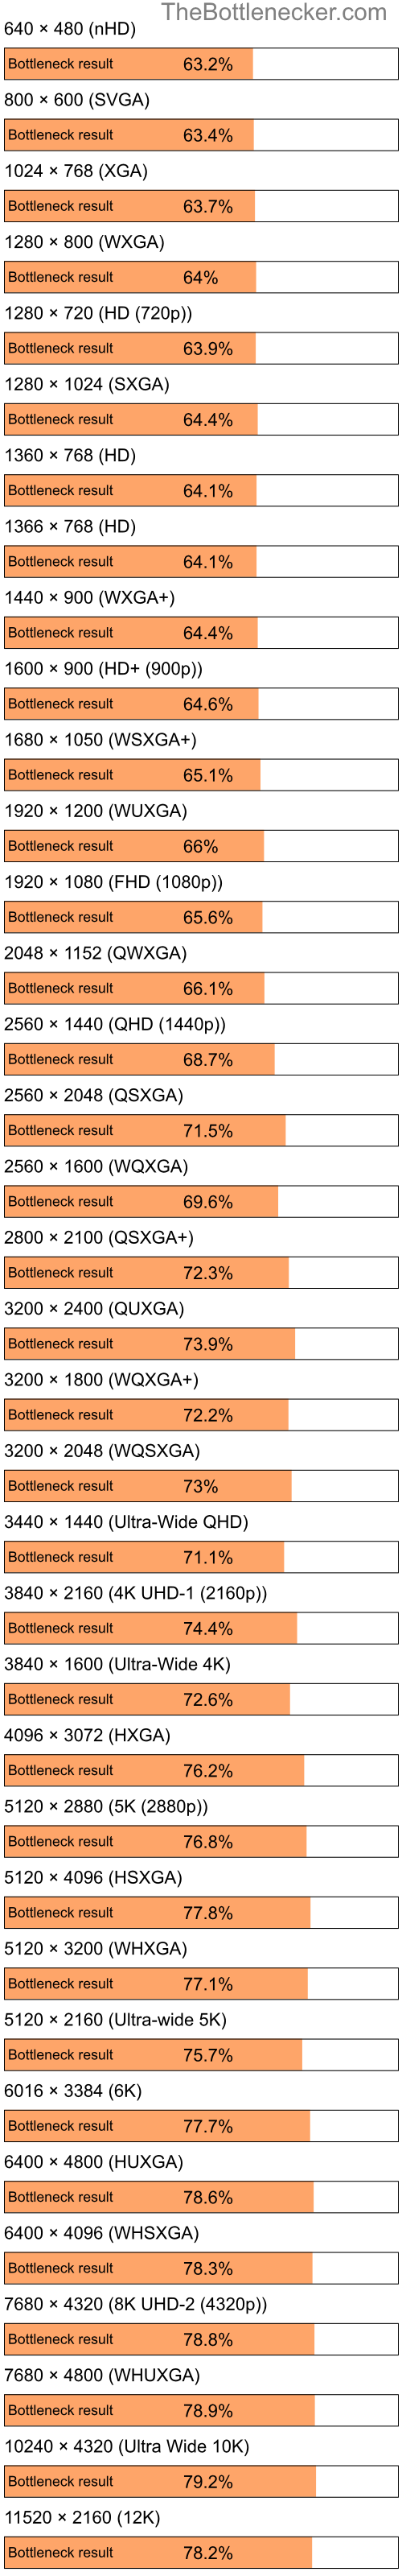 Bottleneck results by resolution for Intel Atom N280 and NVIDIA Quadro FX 550 in Processor Intense Tasks